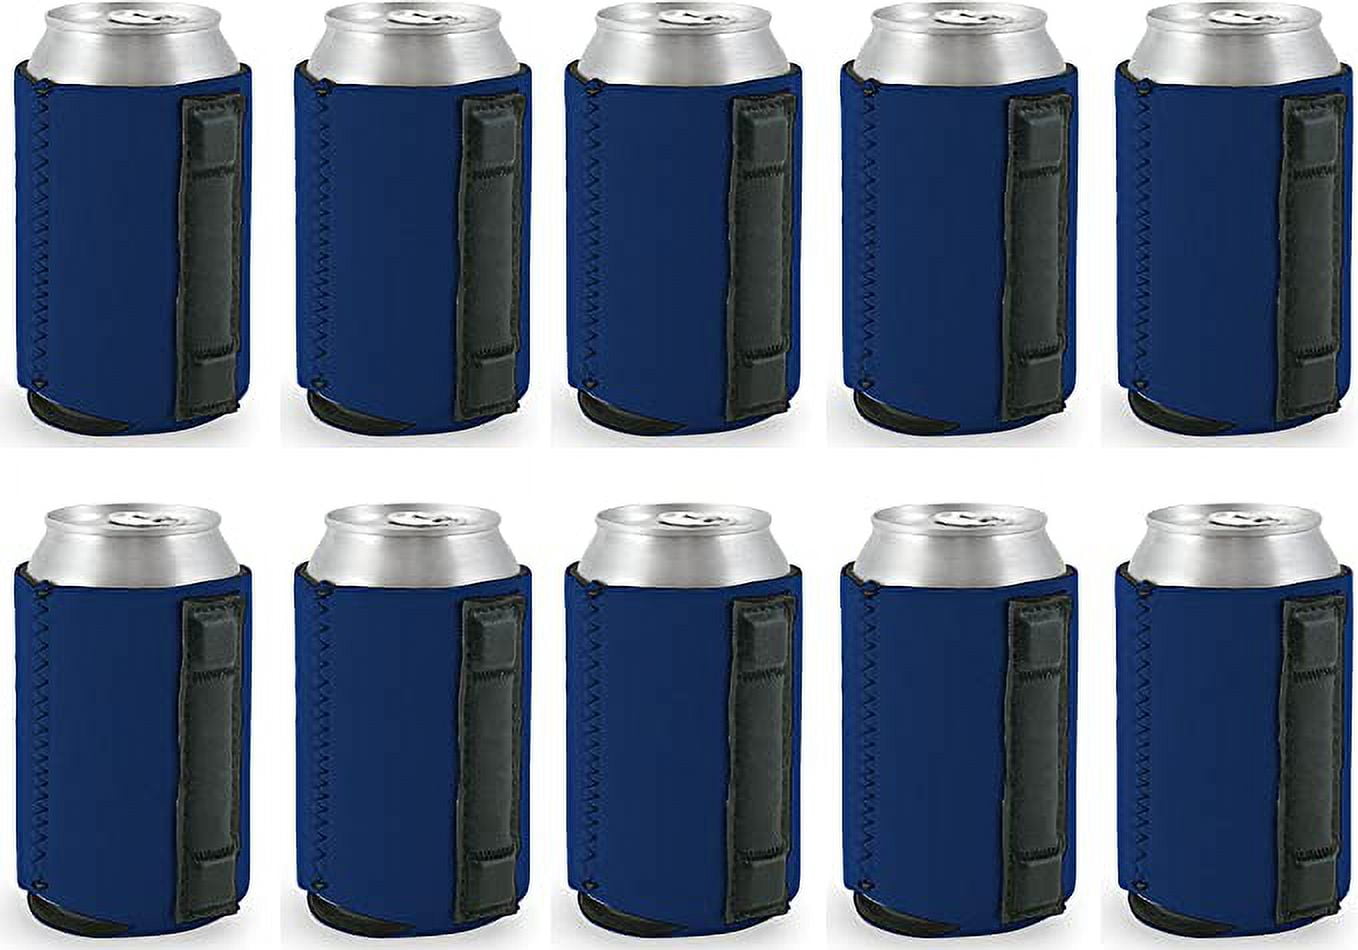 No Ice In This Beer (Navy Can Cooler -- Pack of Two!) - Bennet for Colorado